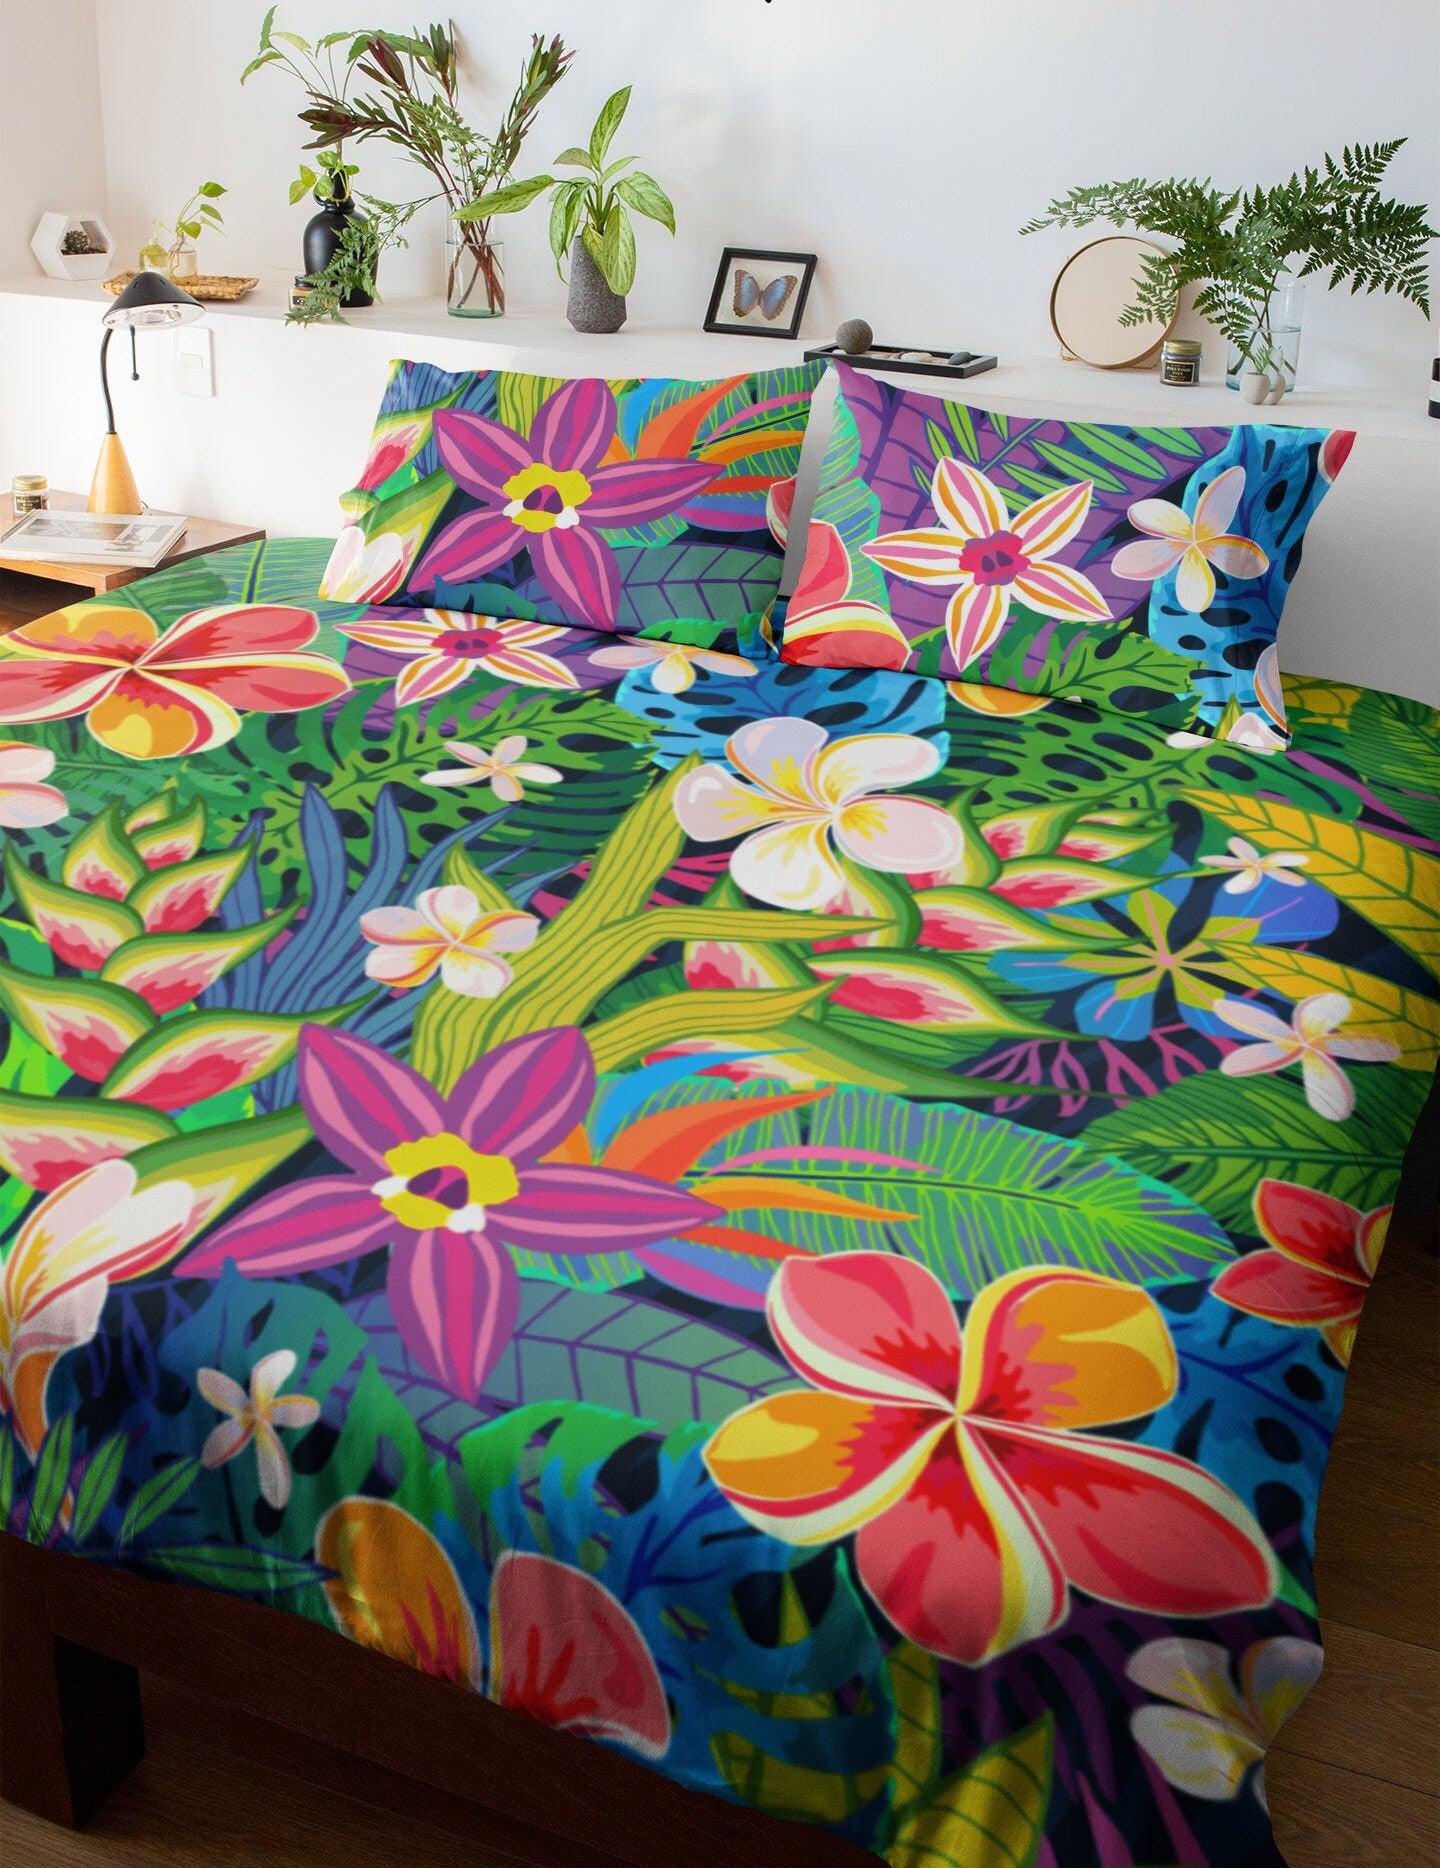 daintyduvet Tropical Design Duvet Cover Set | Colorful Comforter Cover with Flowers in Bright Colors | Cover for Weighted Blanket and Pillows